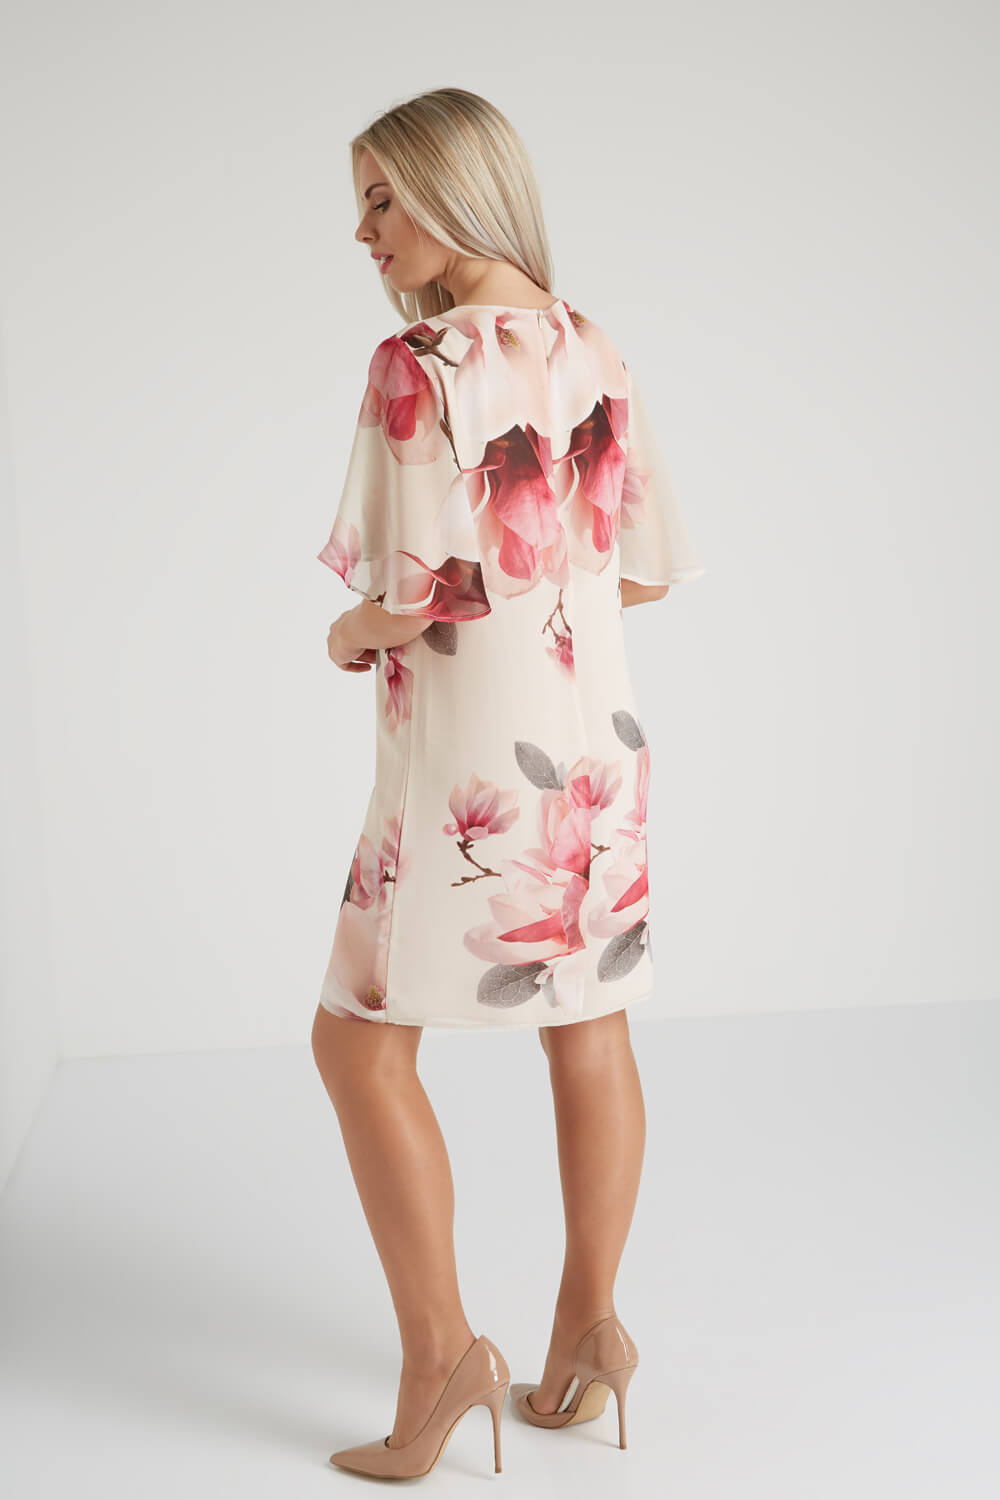 Light Pink All Over Floral Print Chiffon Dress, Image 3 of 5